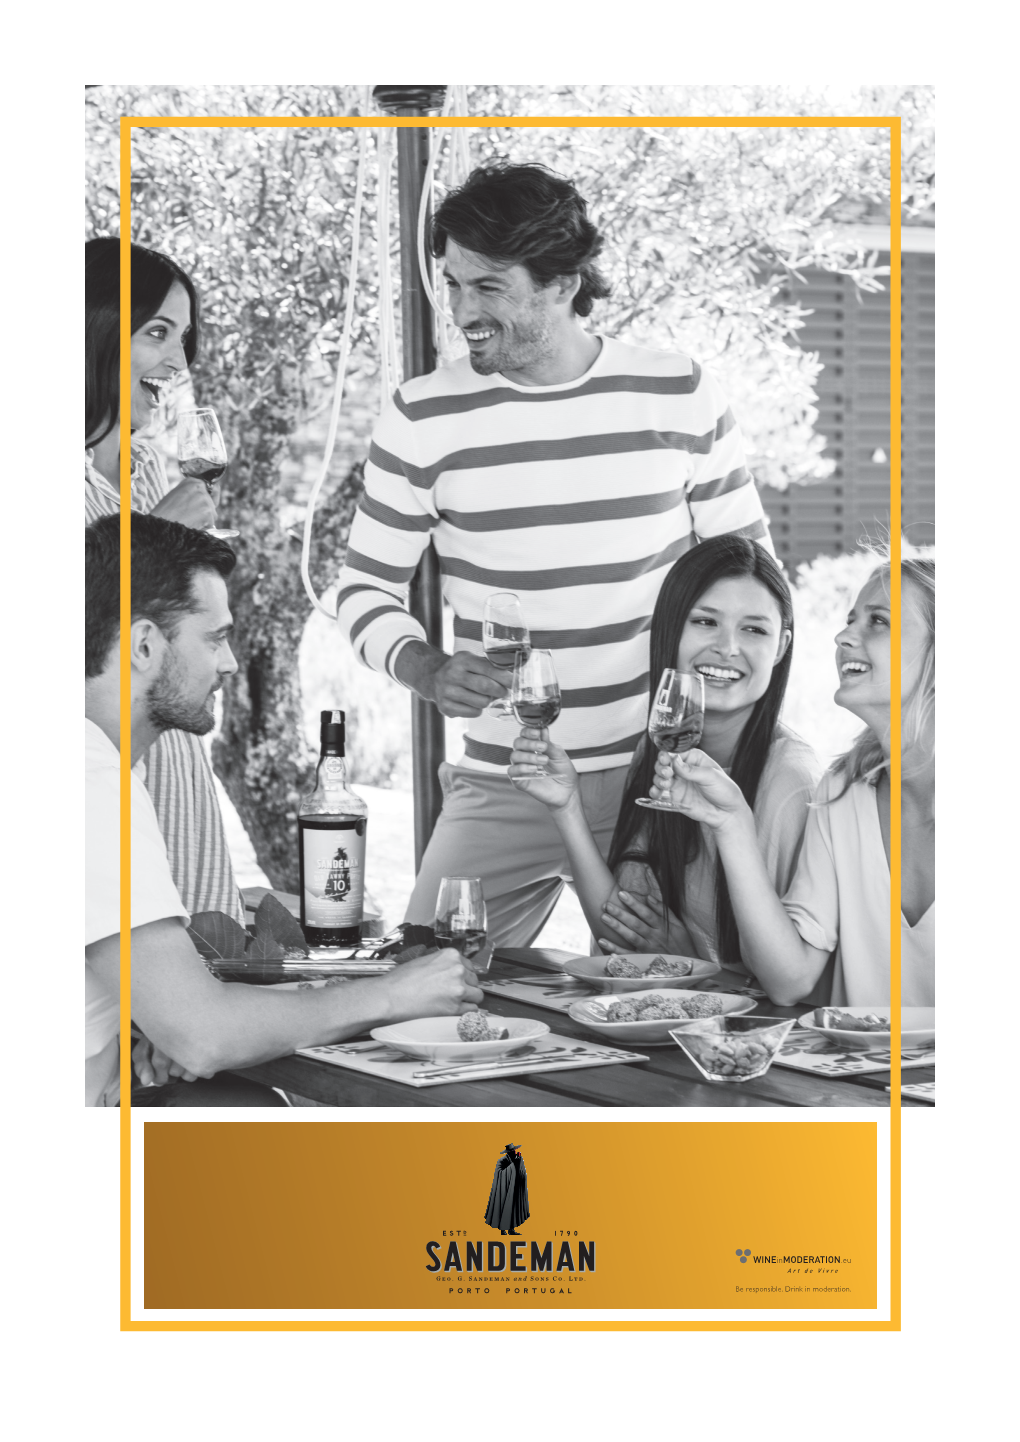 Be Responsible. Drink in Moderation. SANDEMAN the ELEGANCE of a UNIVERSAL BRAND